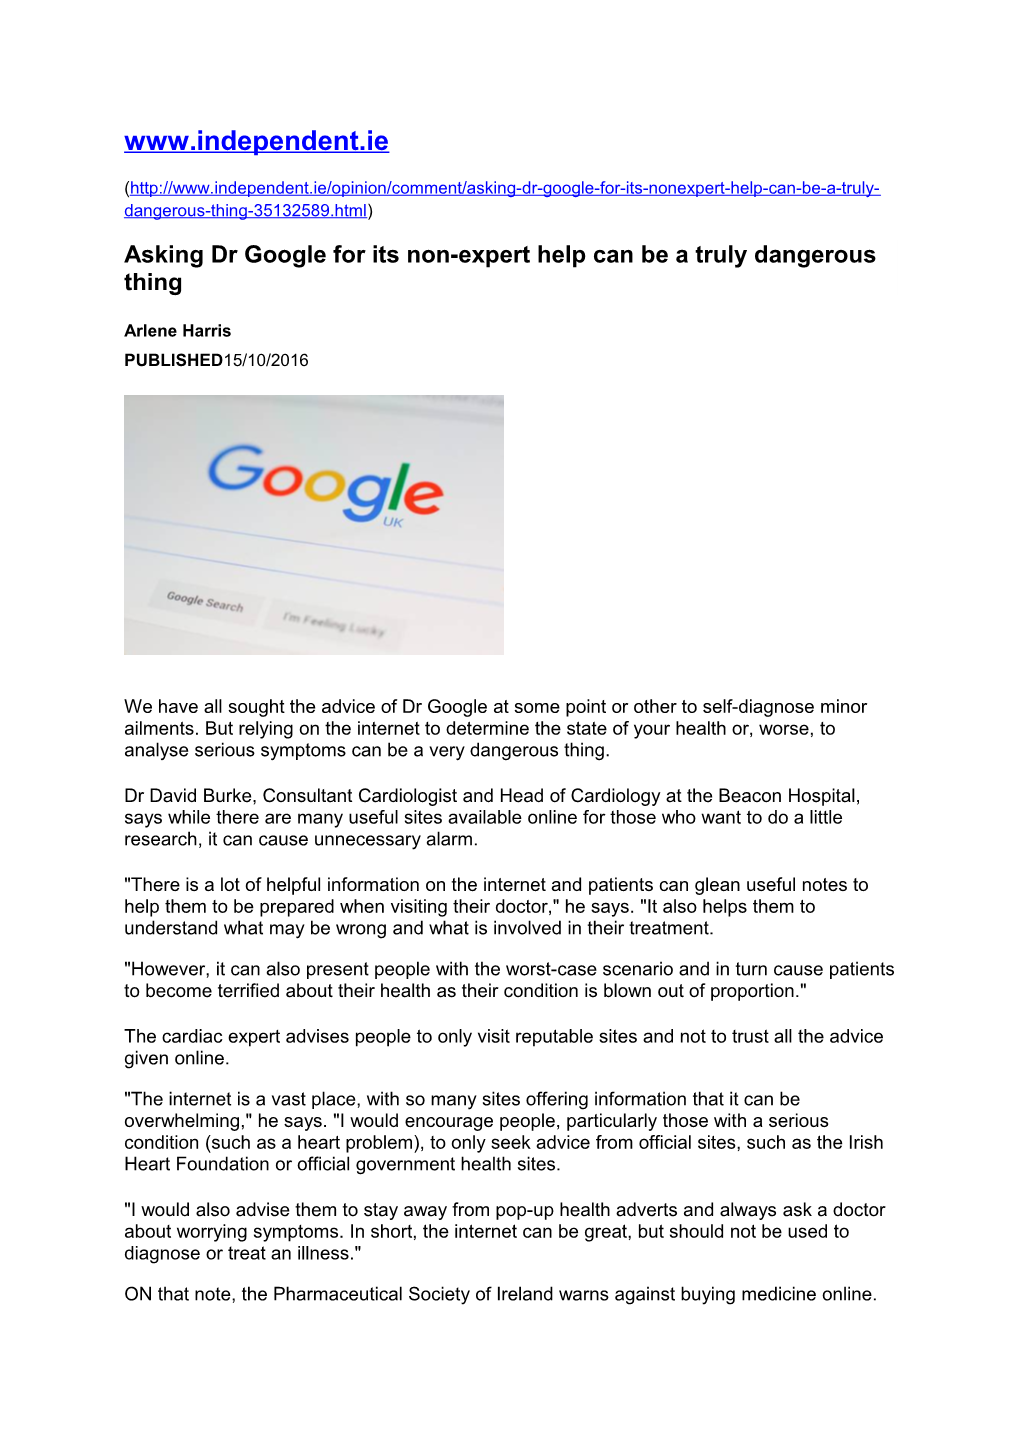 Asking Dr Google for Its Non-Expert Help Can Be a Truly Dangerous Thing